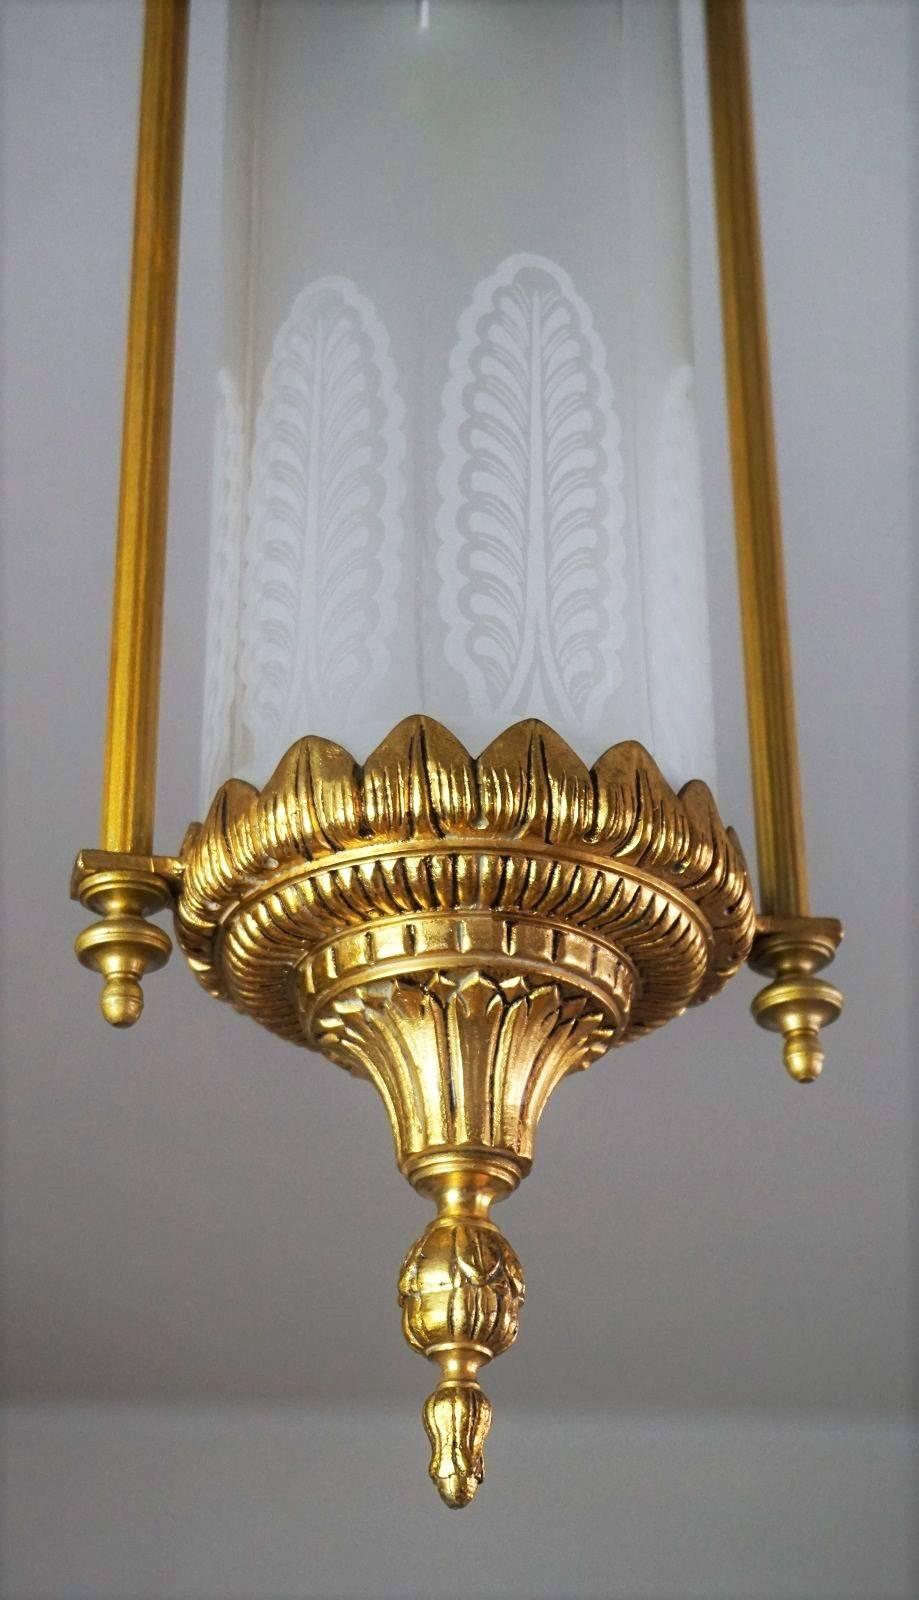 20th Century French Gilt Bronze and Etched Glass Cylinder Lantern Pendant, circa 1940